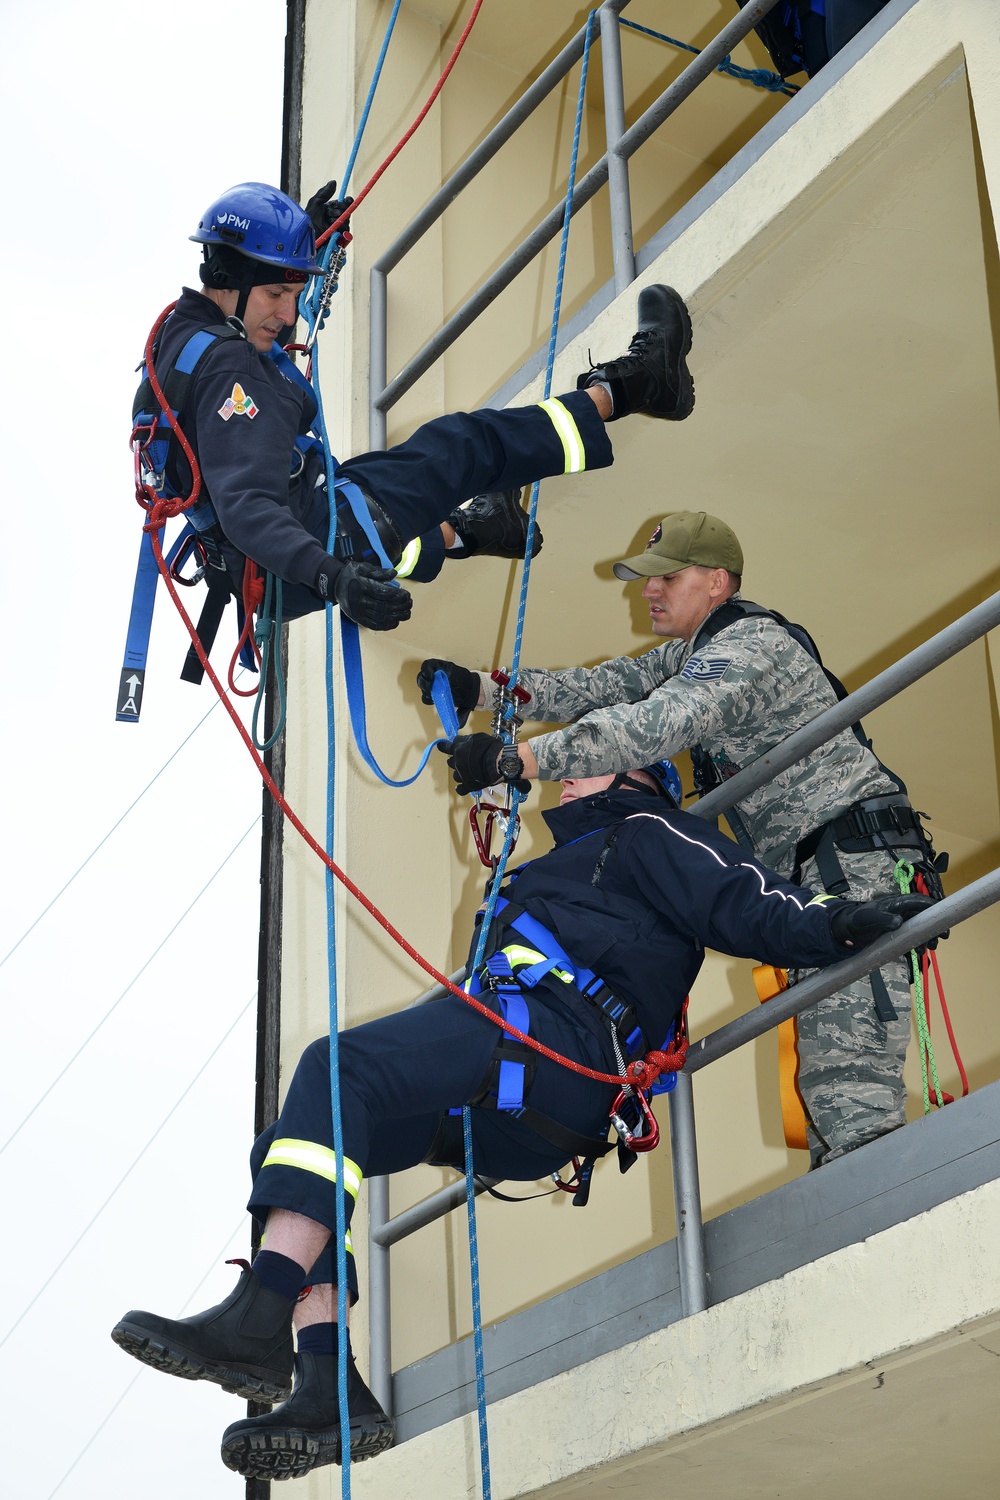 DVIDS - Images - DOD TECHNICAL ROPE RESCUE 1, USAG ITALY FIRE DEPARTMENT  [Image 18 of 19]